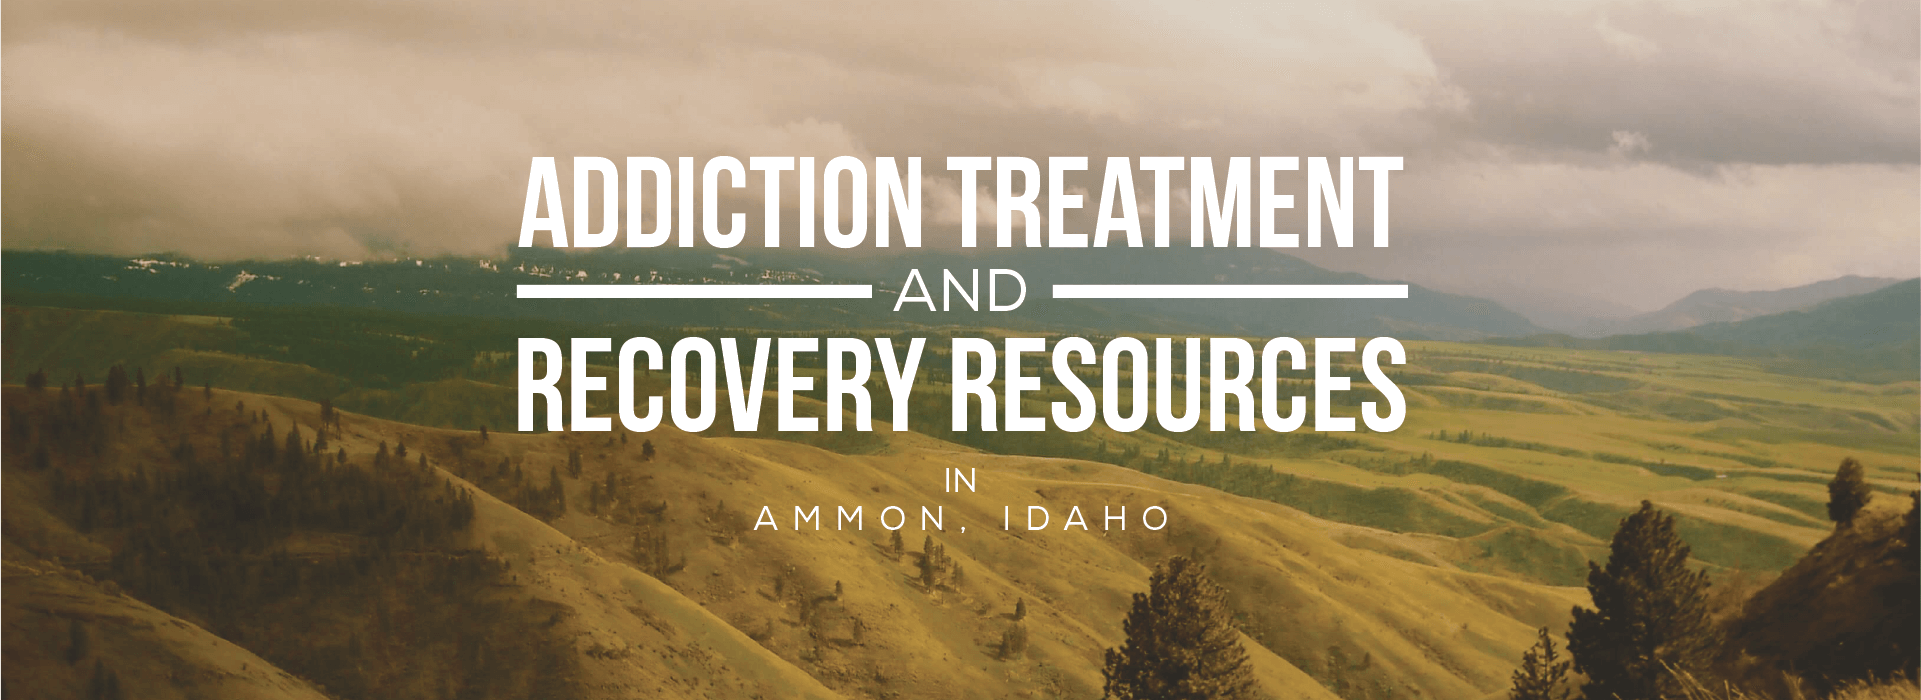 Addiction treatment and recovery resources in Ammon, Idaho